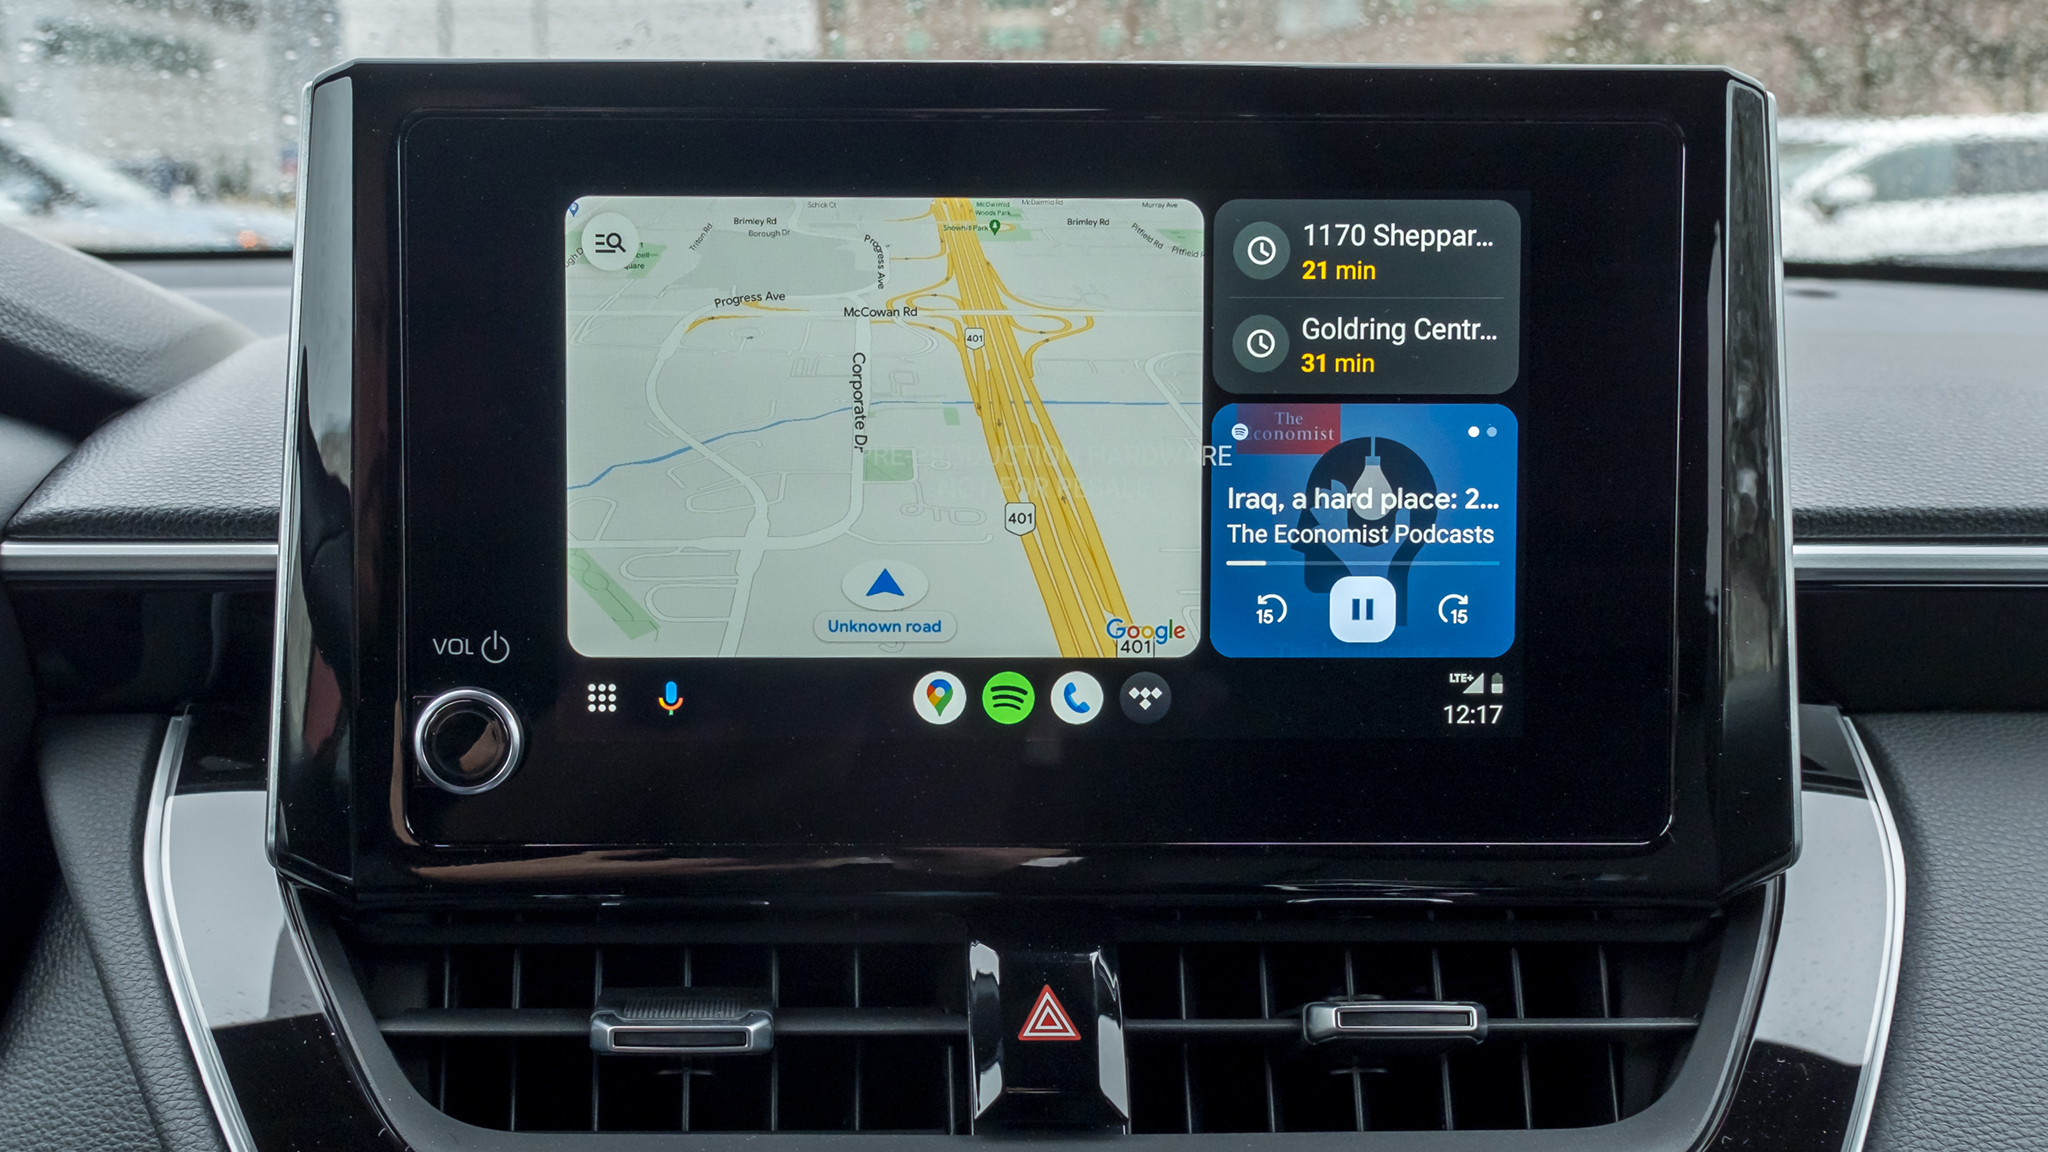 Android Auto opens to more navigation apps - 9to5Google